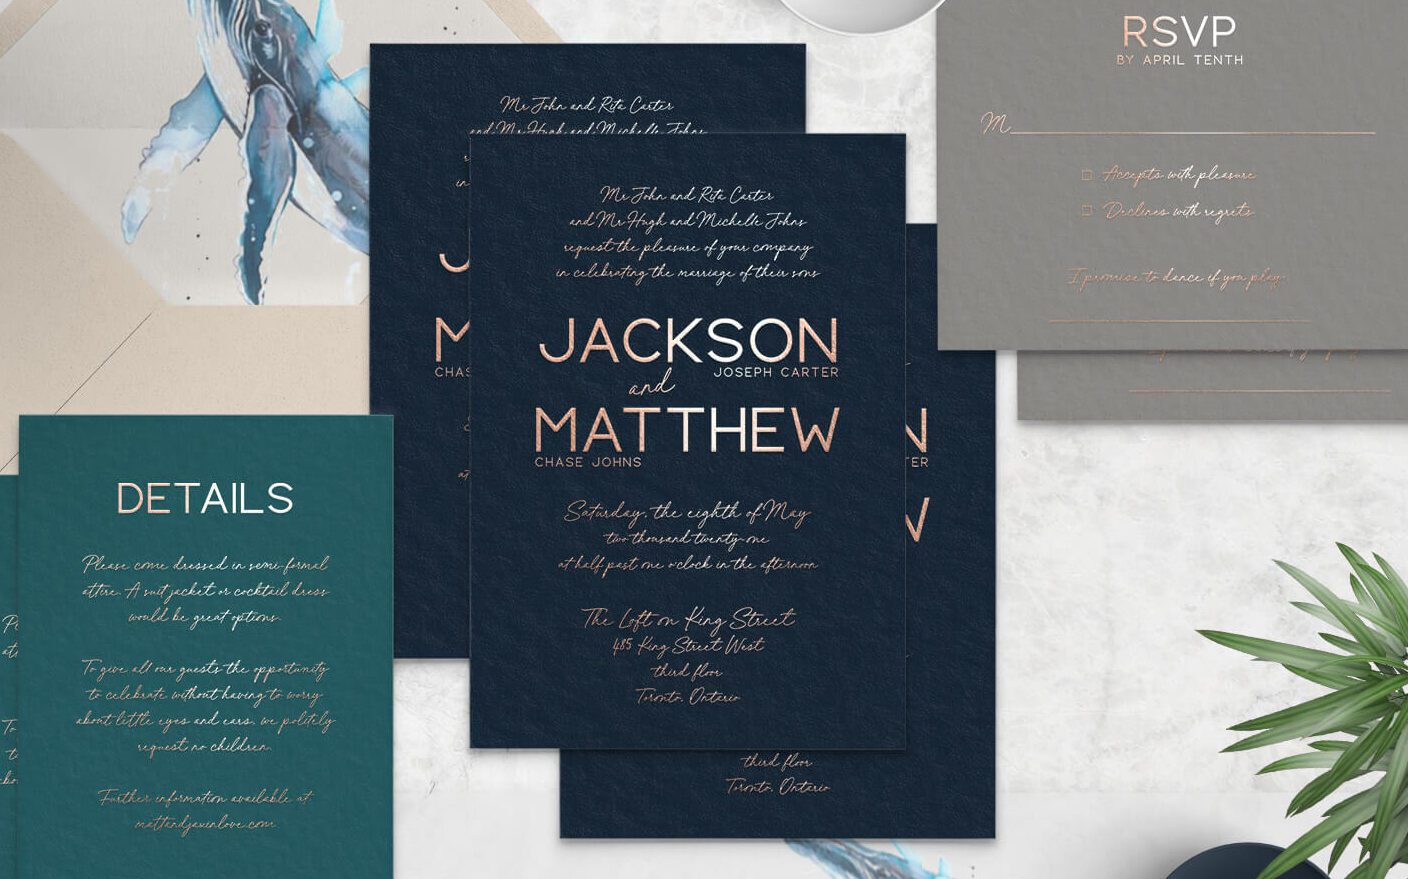 Foil stamped wedding invitation suite - rose gold and deep sea